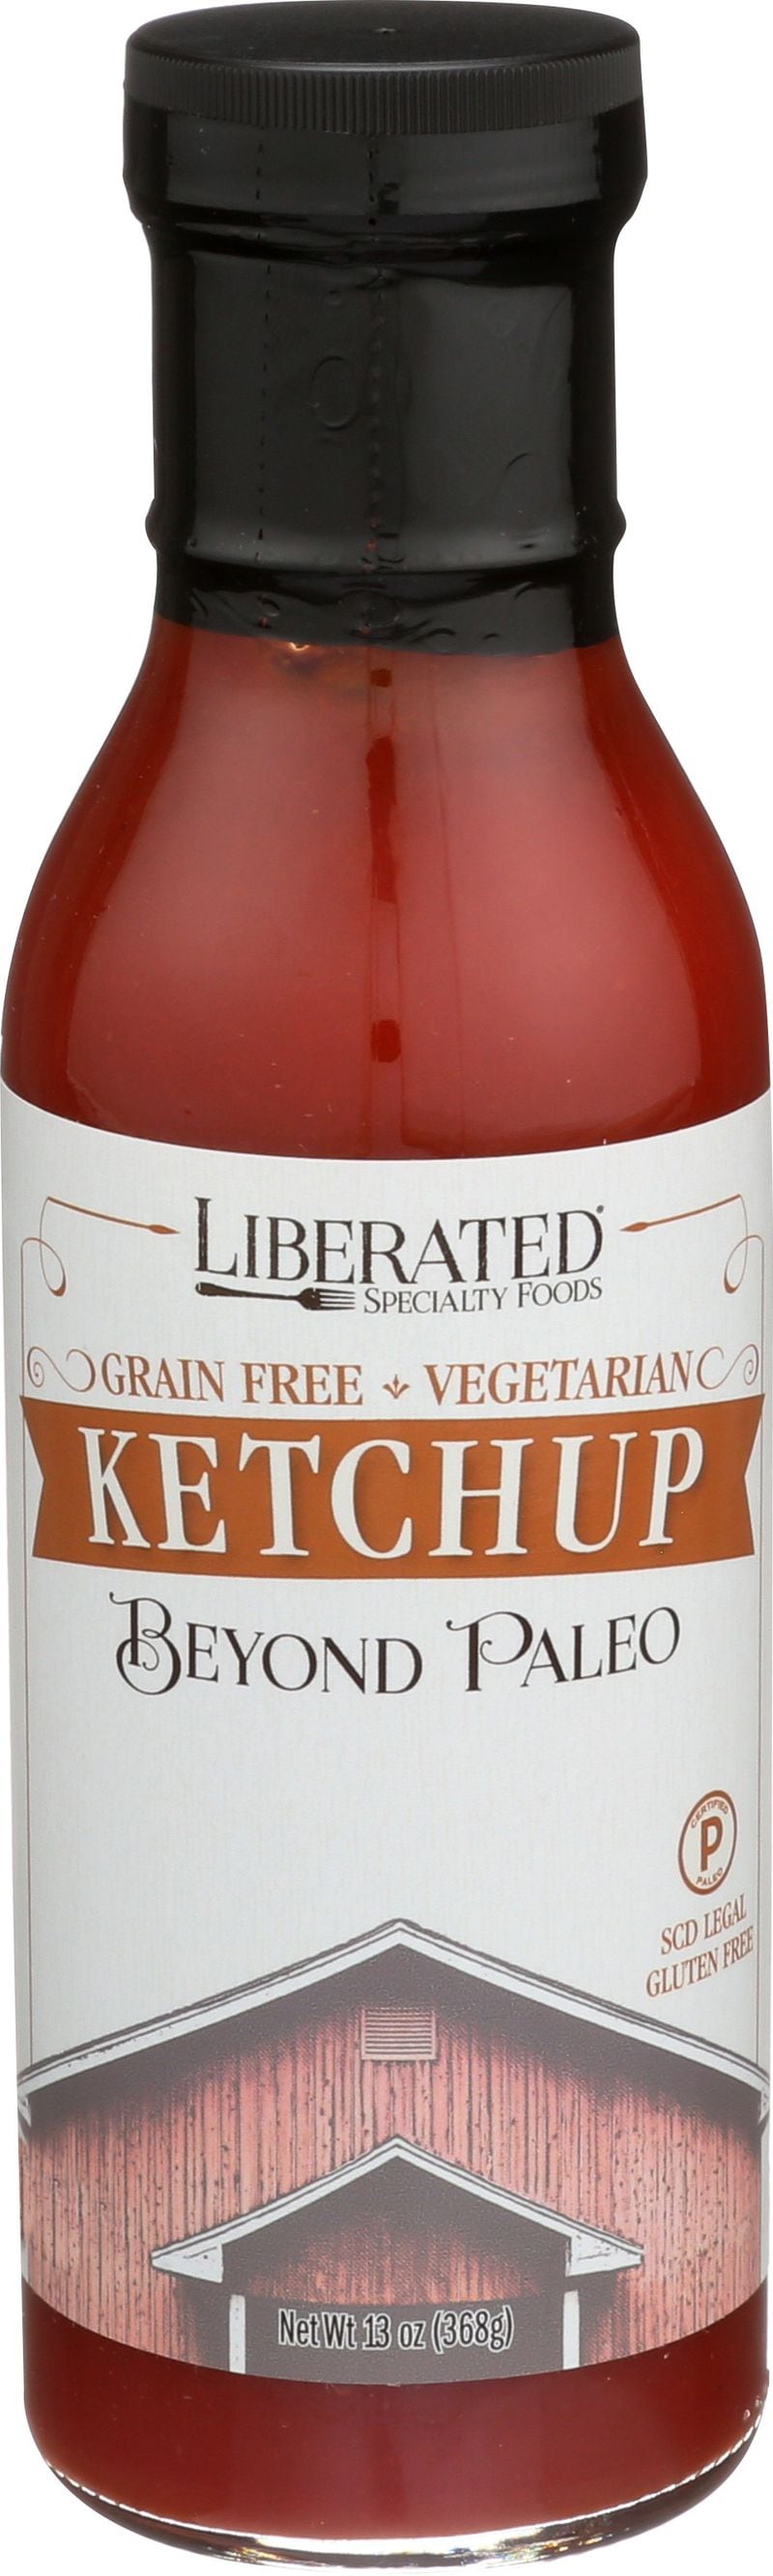  Ketchup from Liberated Specialty Foods